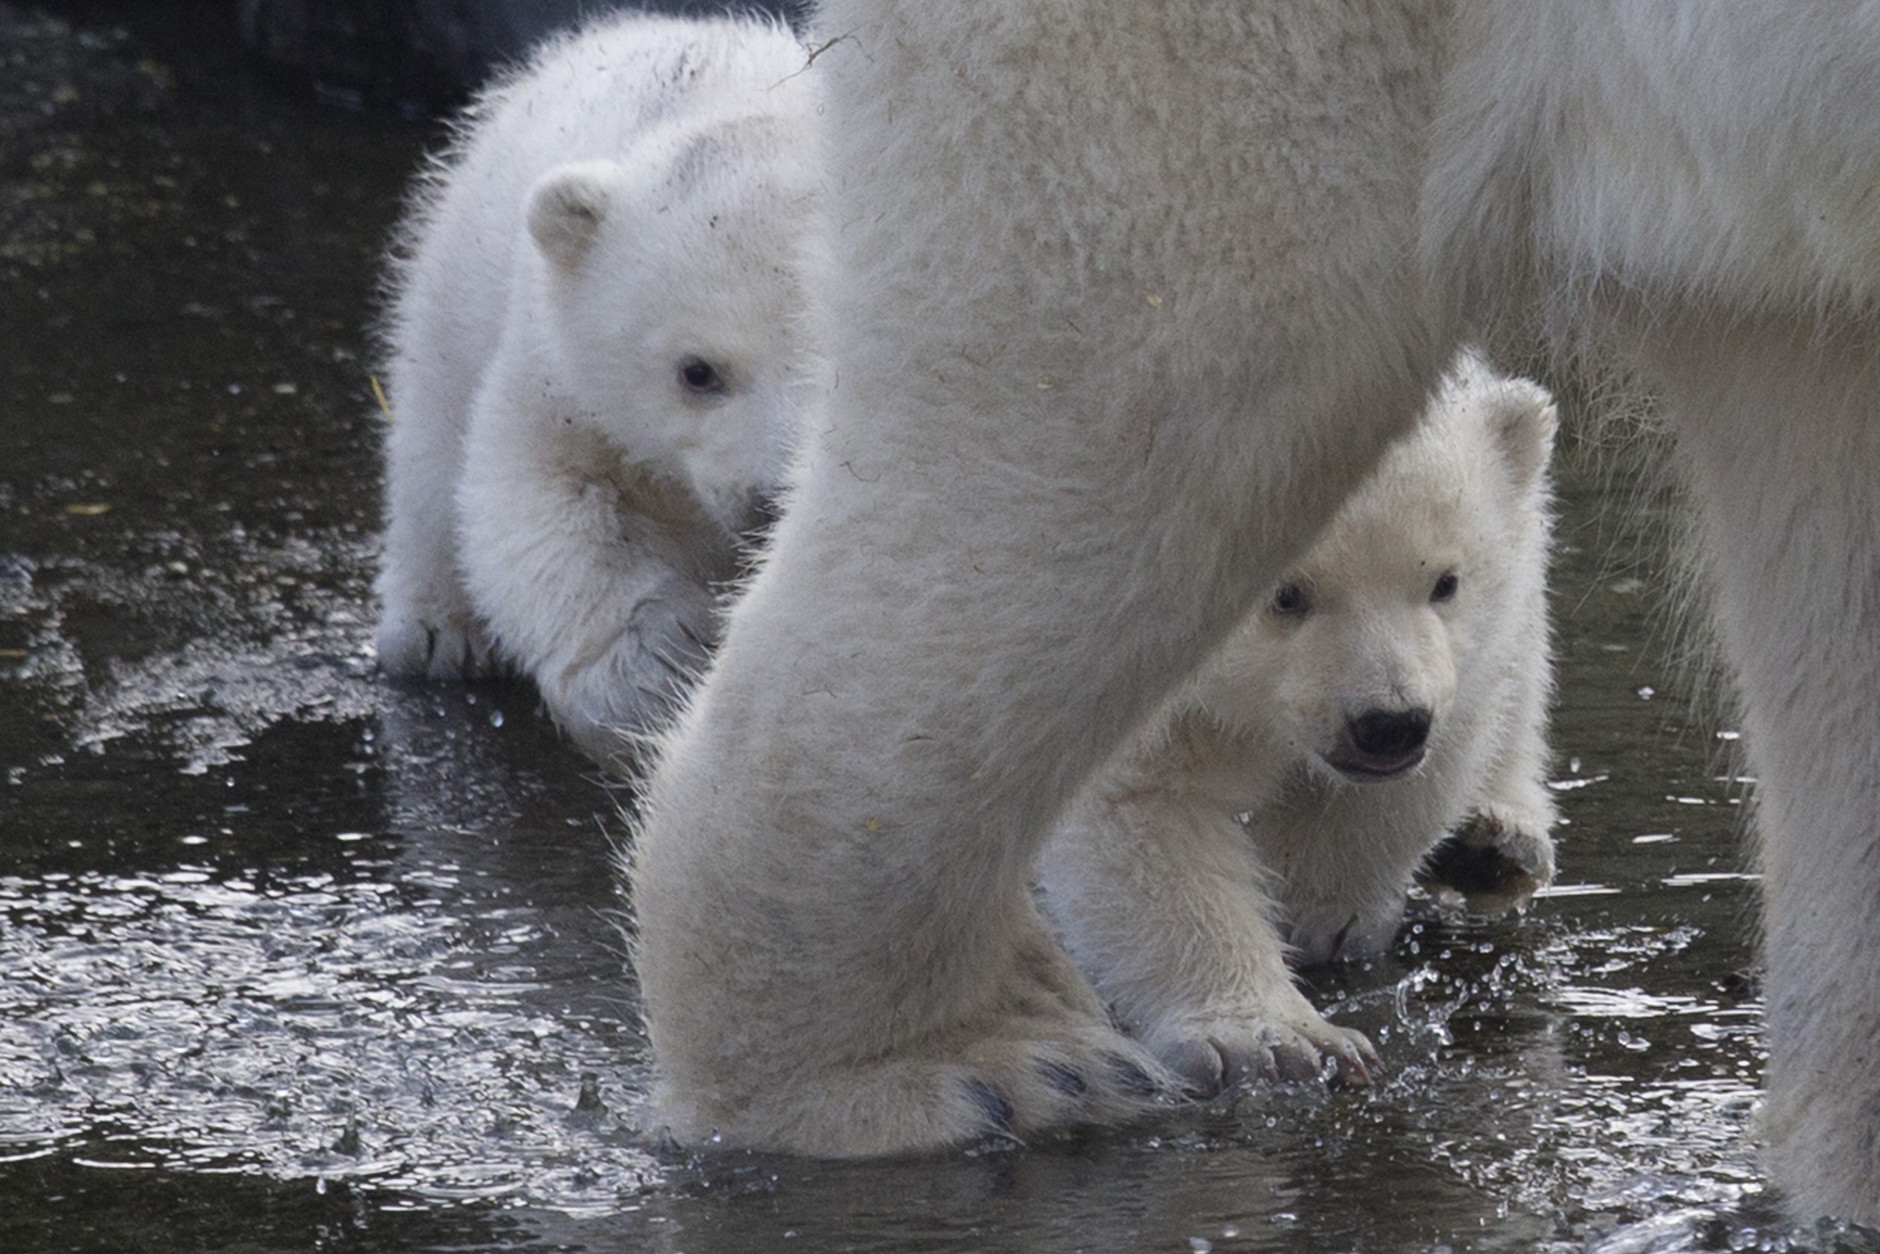 Two polar bear cubs follow their mother as they venture outside their enclosure for the first time since they were born at Ouwehands Zoo in Rhenen, Netherlands, Thursday, Feb. 19, 2015. Three cubs were born Nov. 22, 2014 but one of the triplets died soon after birth, the cub's mother and grandmother live at the zoo, their father now lives at the Yorkshire Wildlife Park in England. (AP Photo/Peter Dejong)